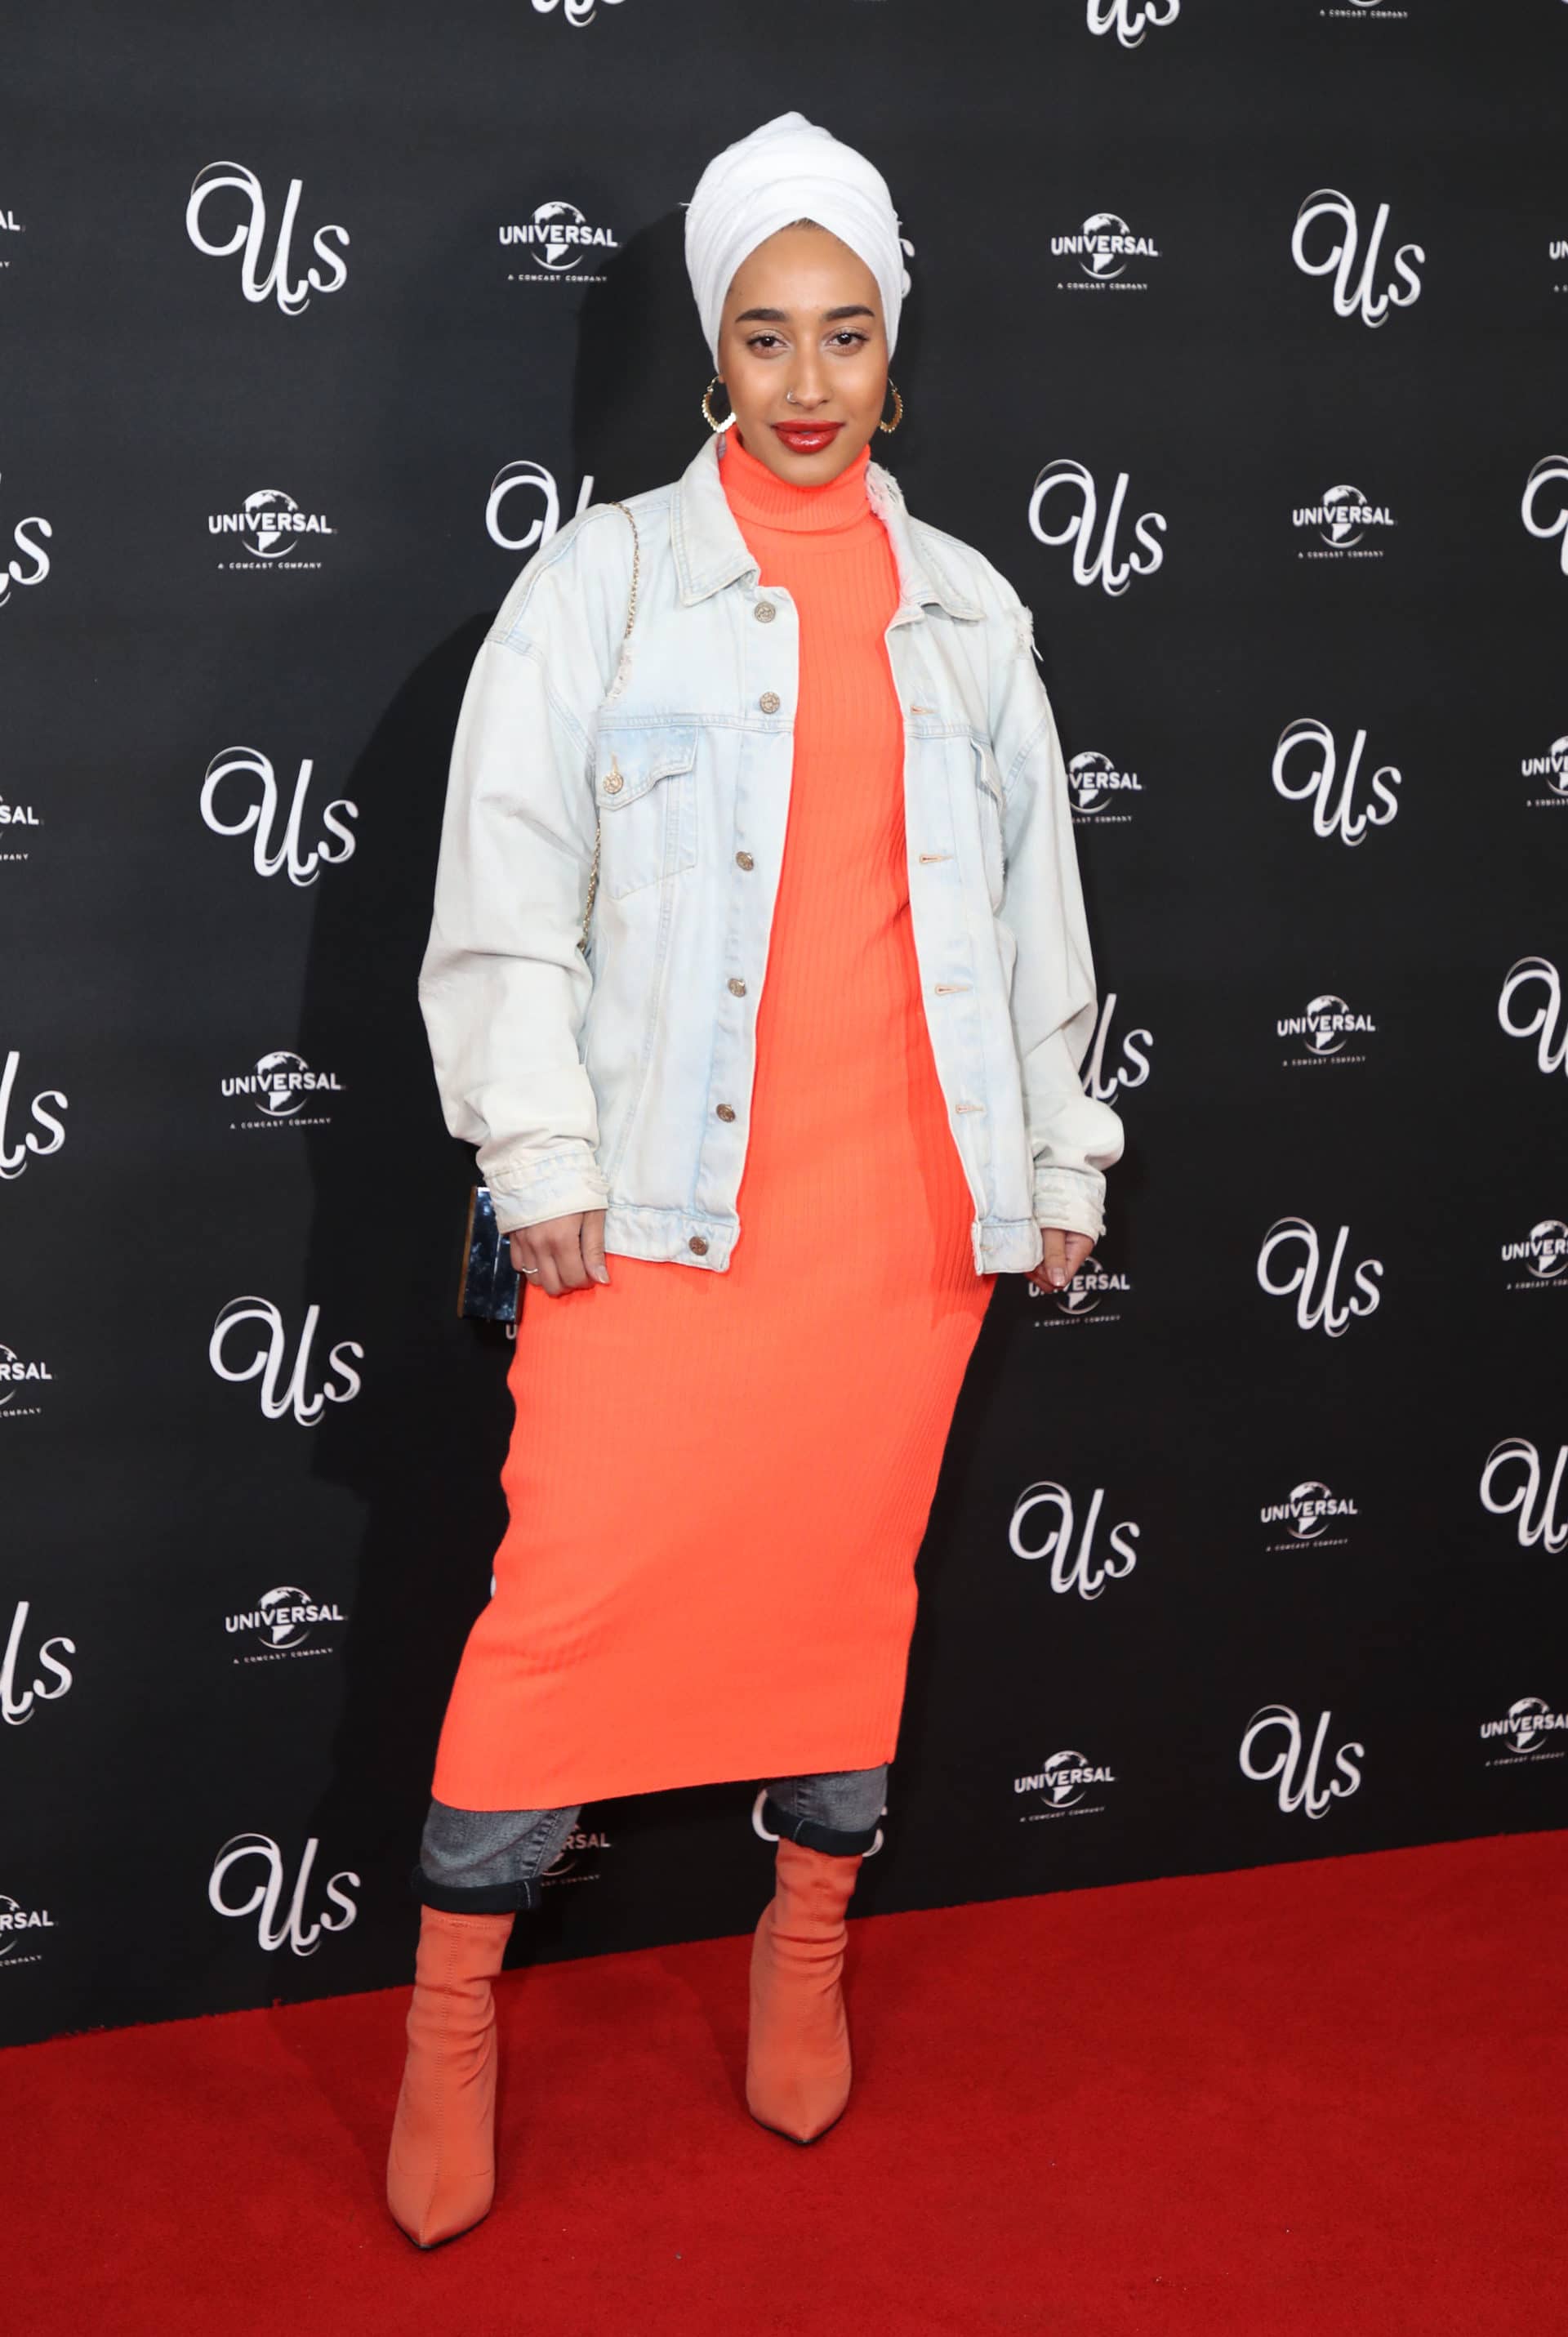 Quincy Brown, Lupita Nyong'o, Alicia Keys, And More Celebs Out And About